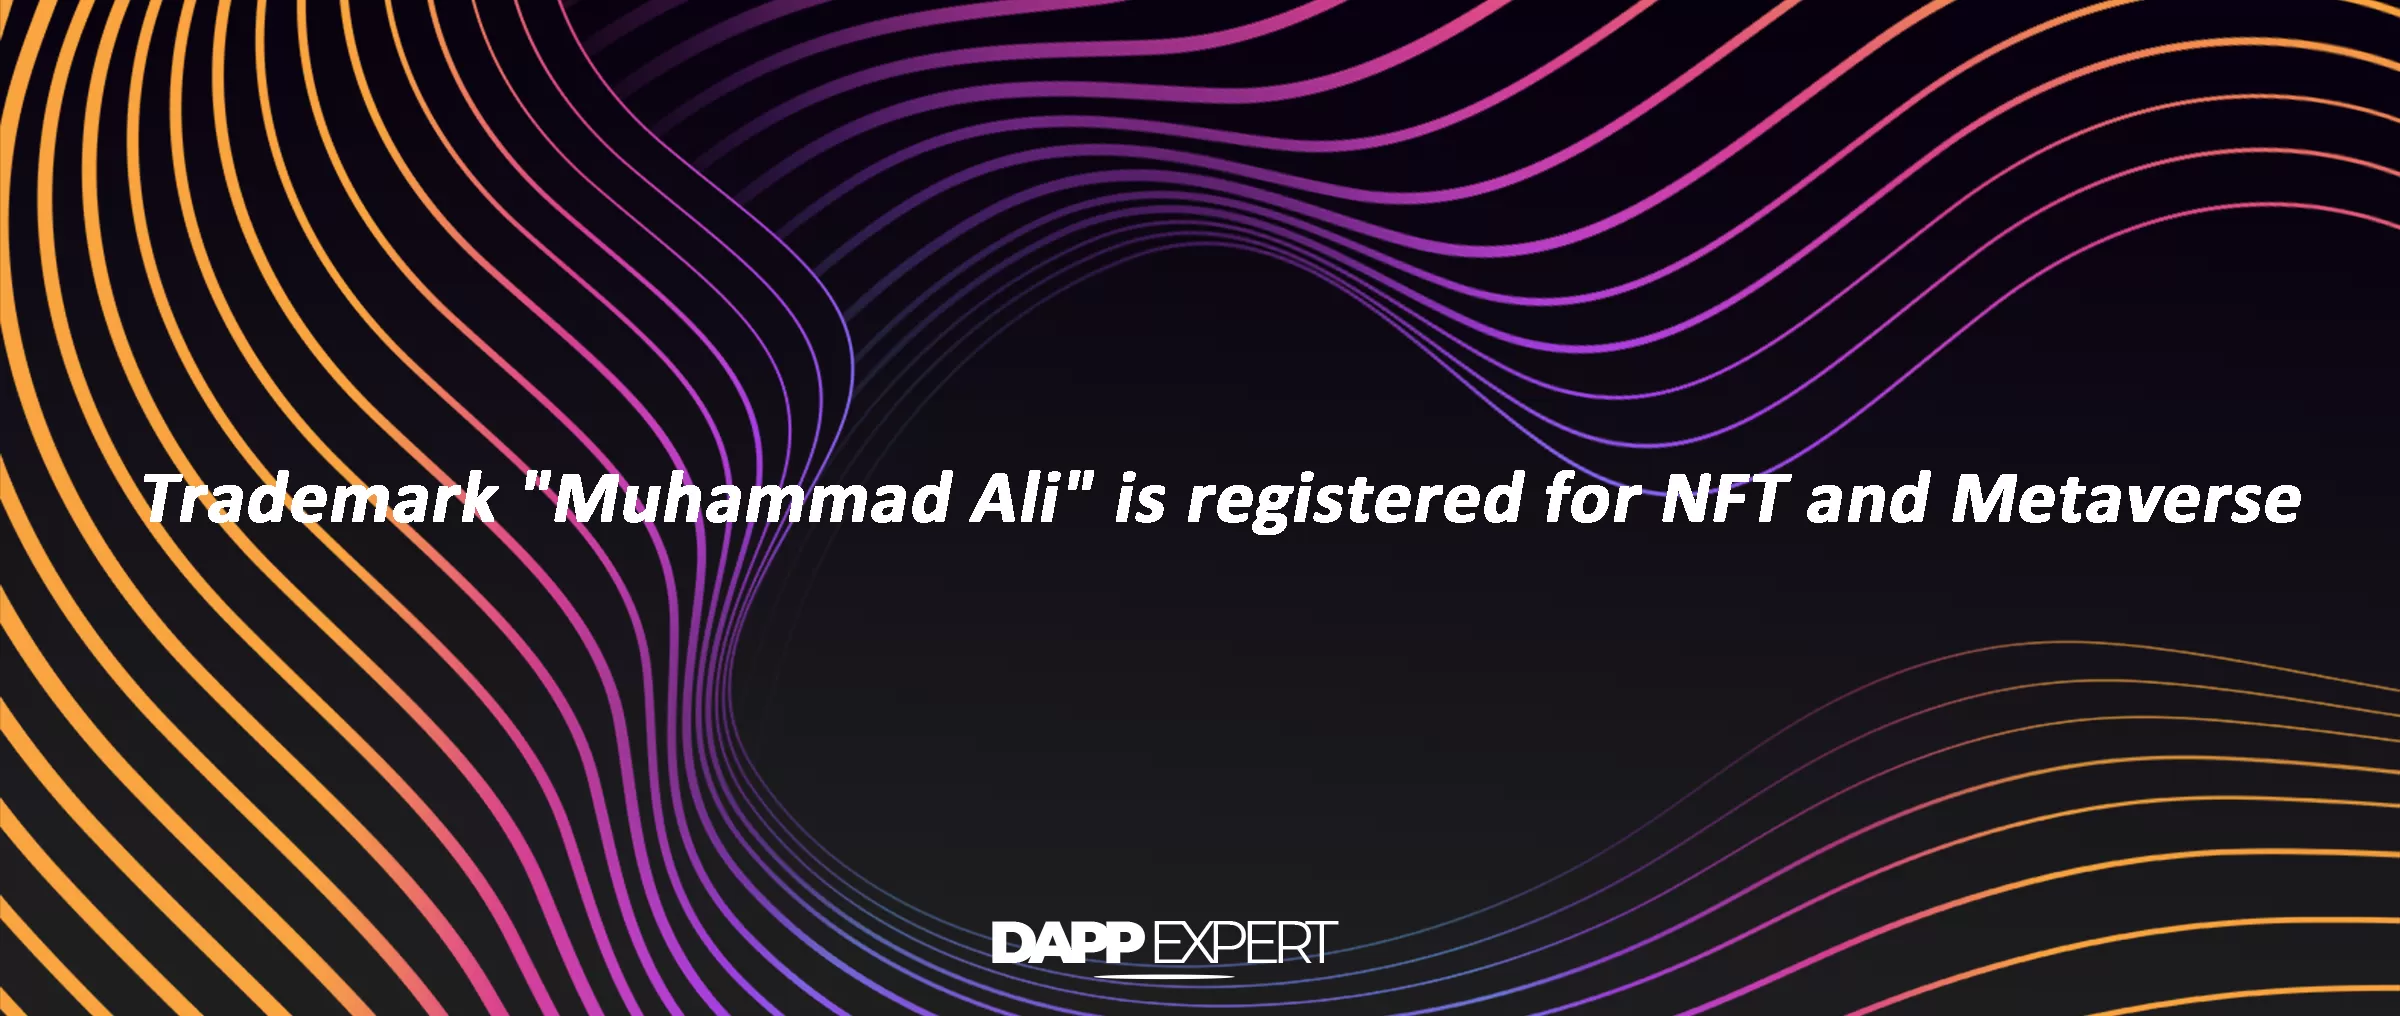 Trademark "Muhammad Ali" is registered for NFT and Metaverse